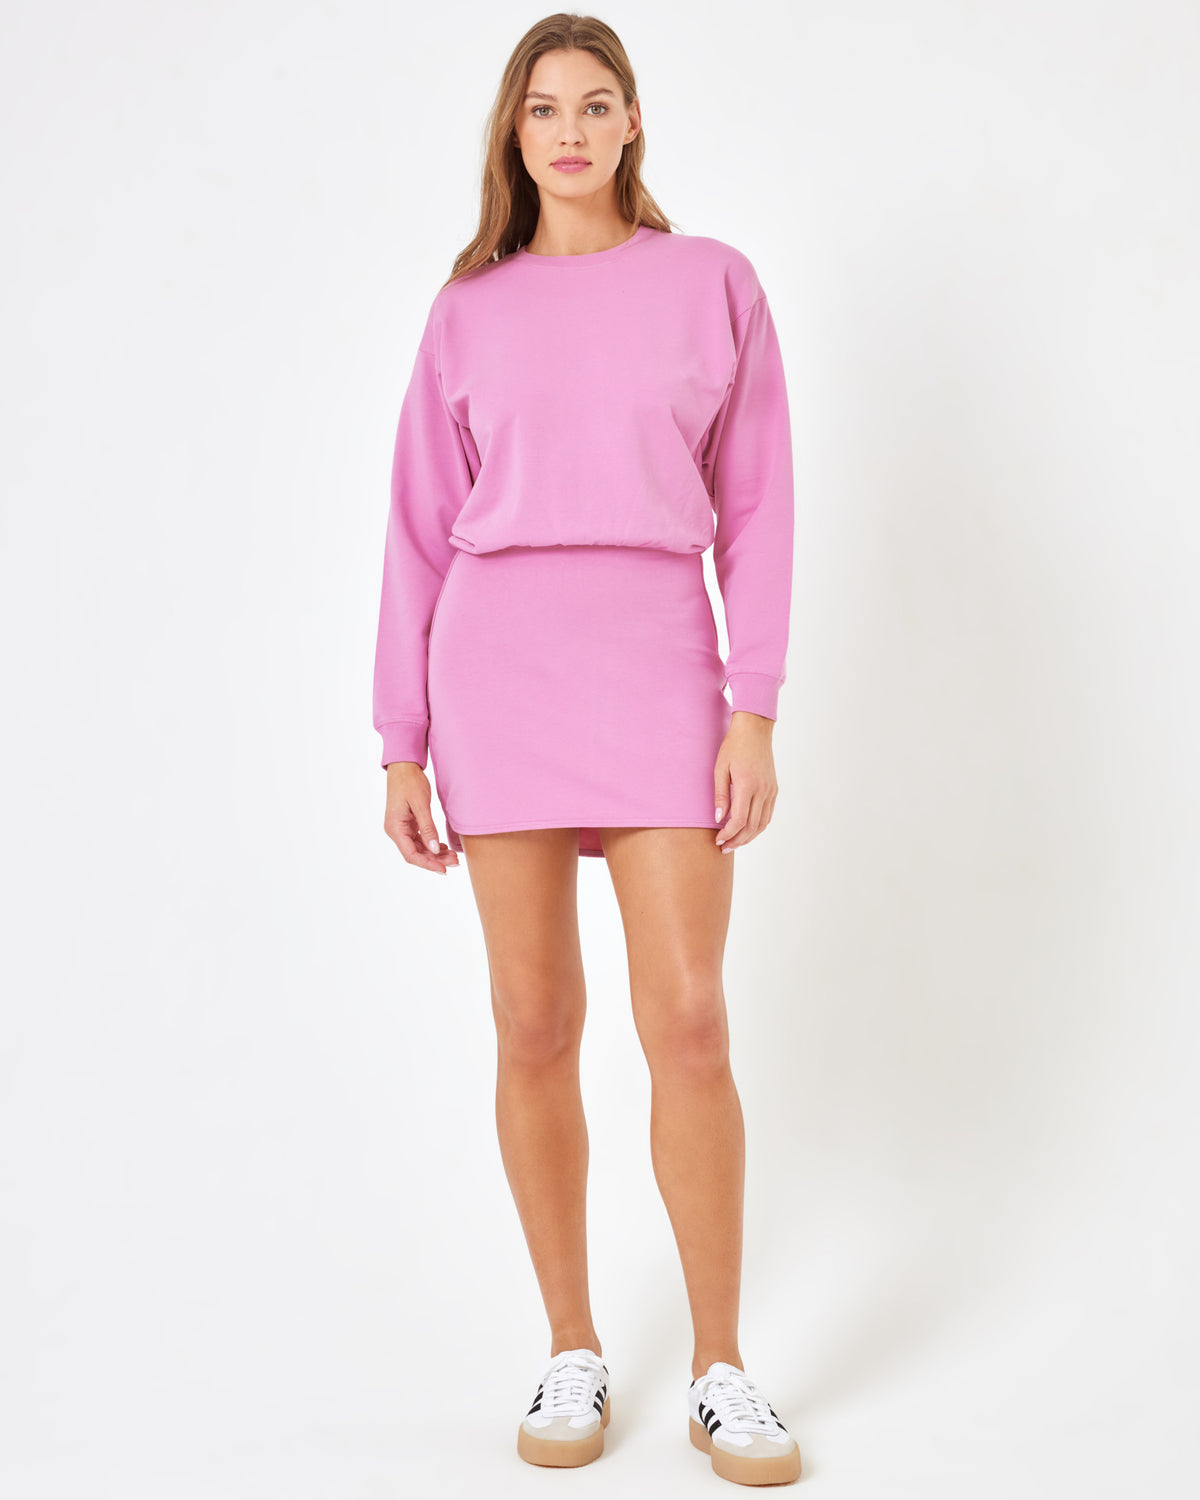 LSPACE X Anthropologie Groove Dress - Pink Lady Pink Lady | Model: Daria (size: S) | Hover